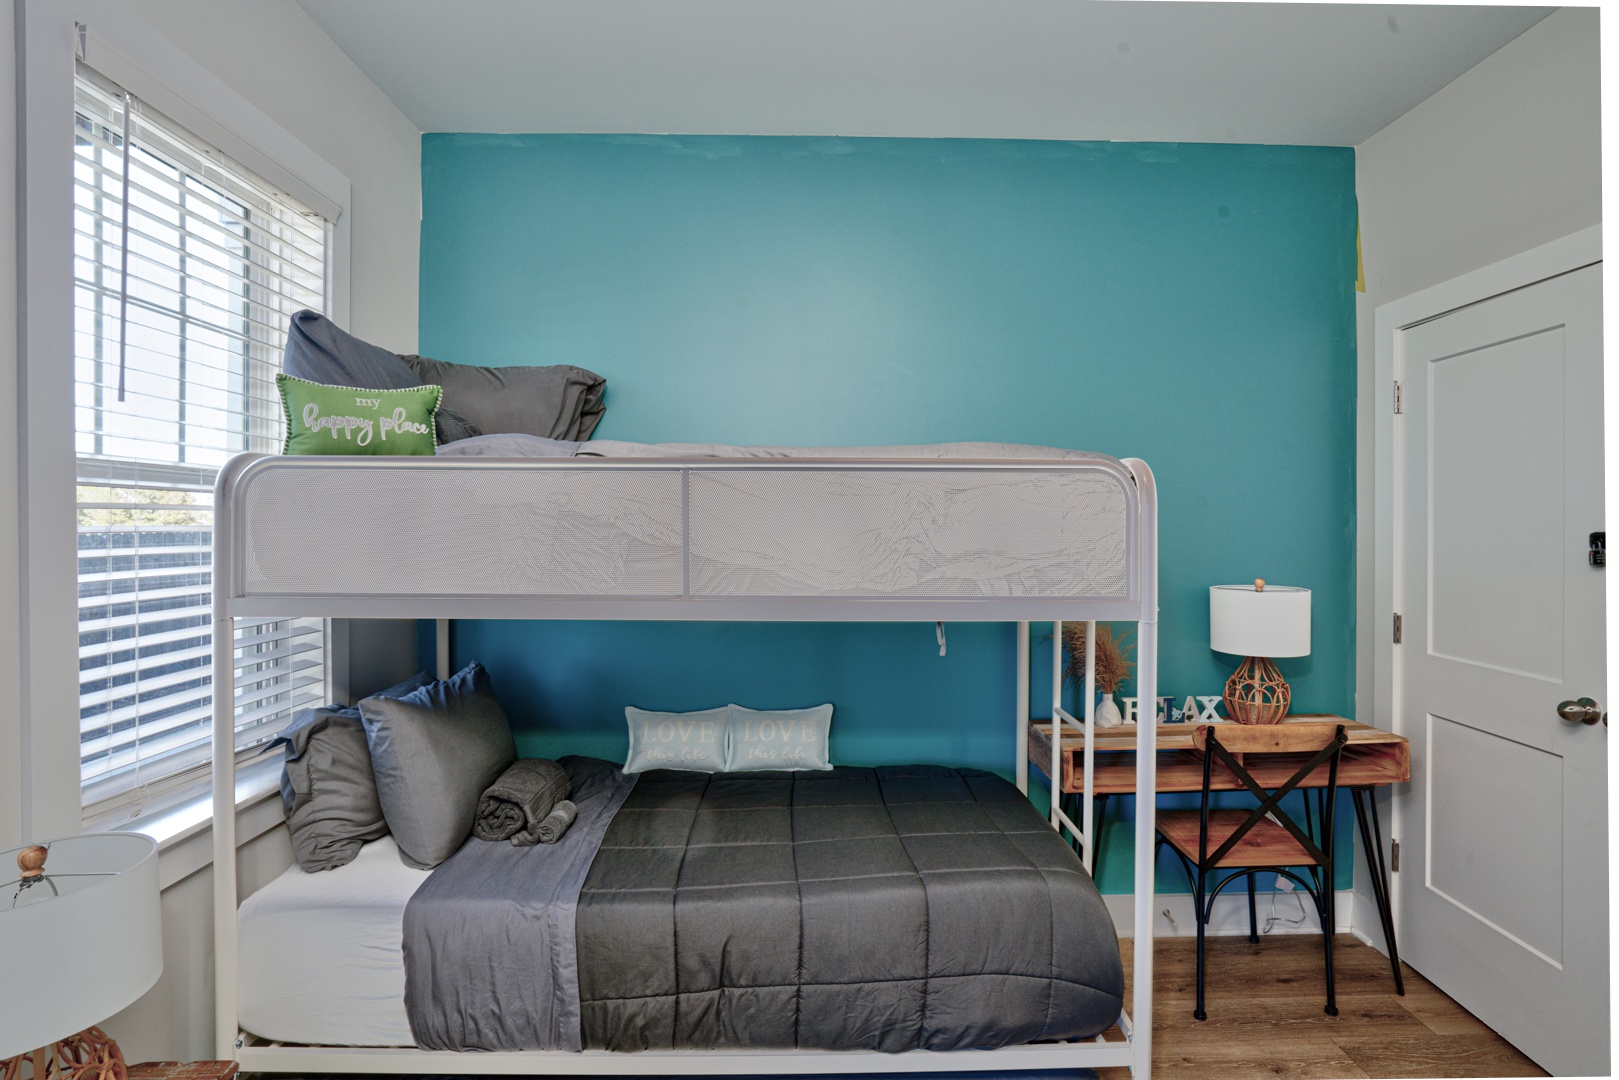 The 1st floor bunk room offers a twin-over-twin bunkbed with twin trundle